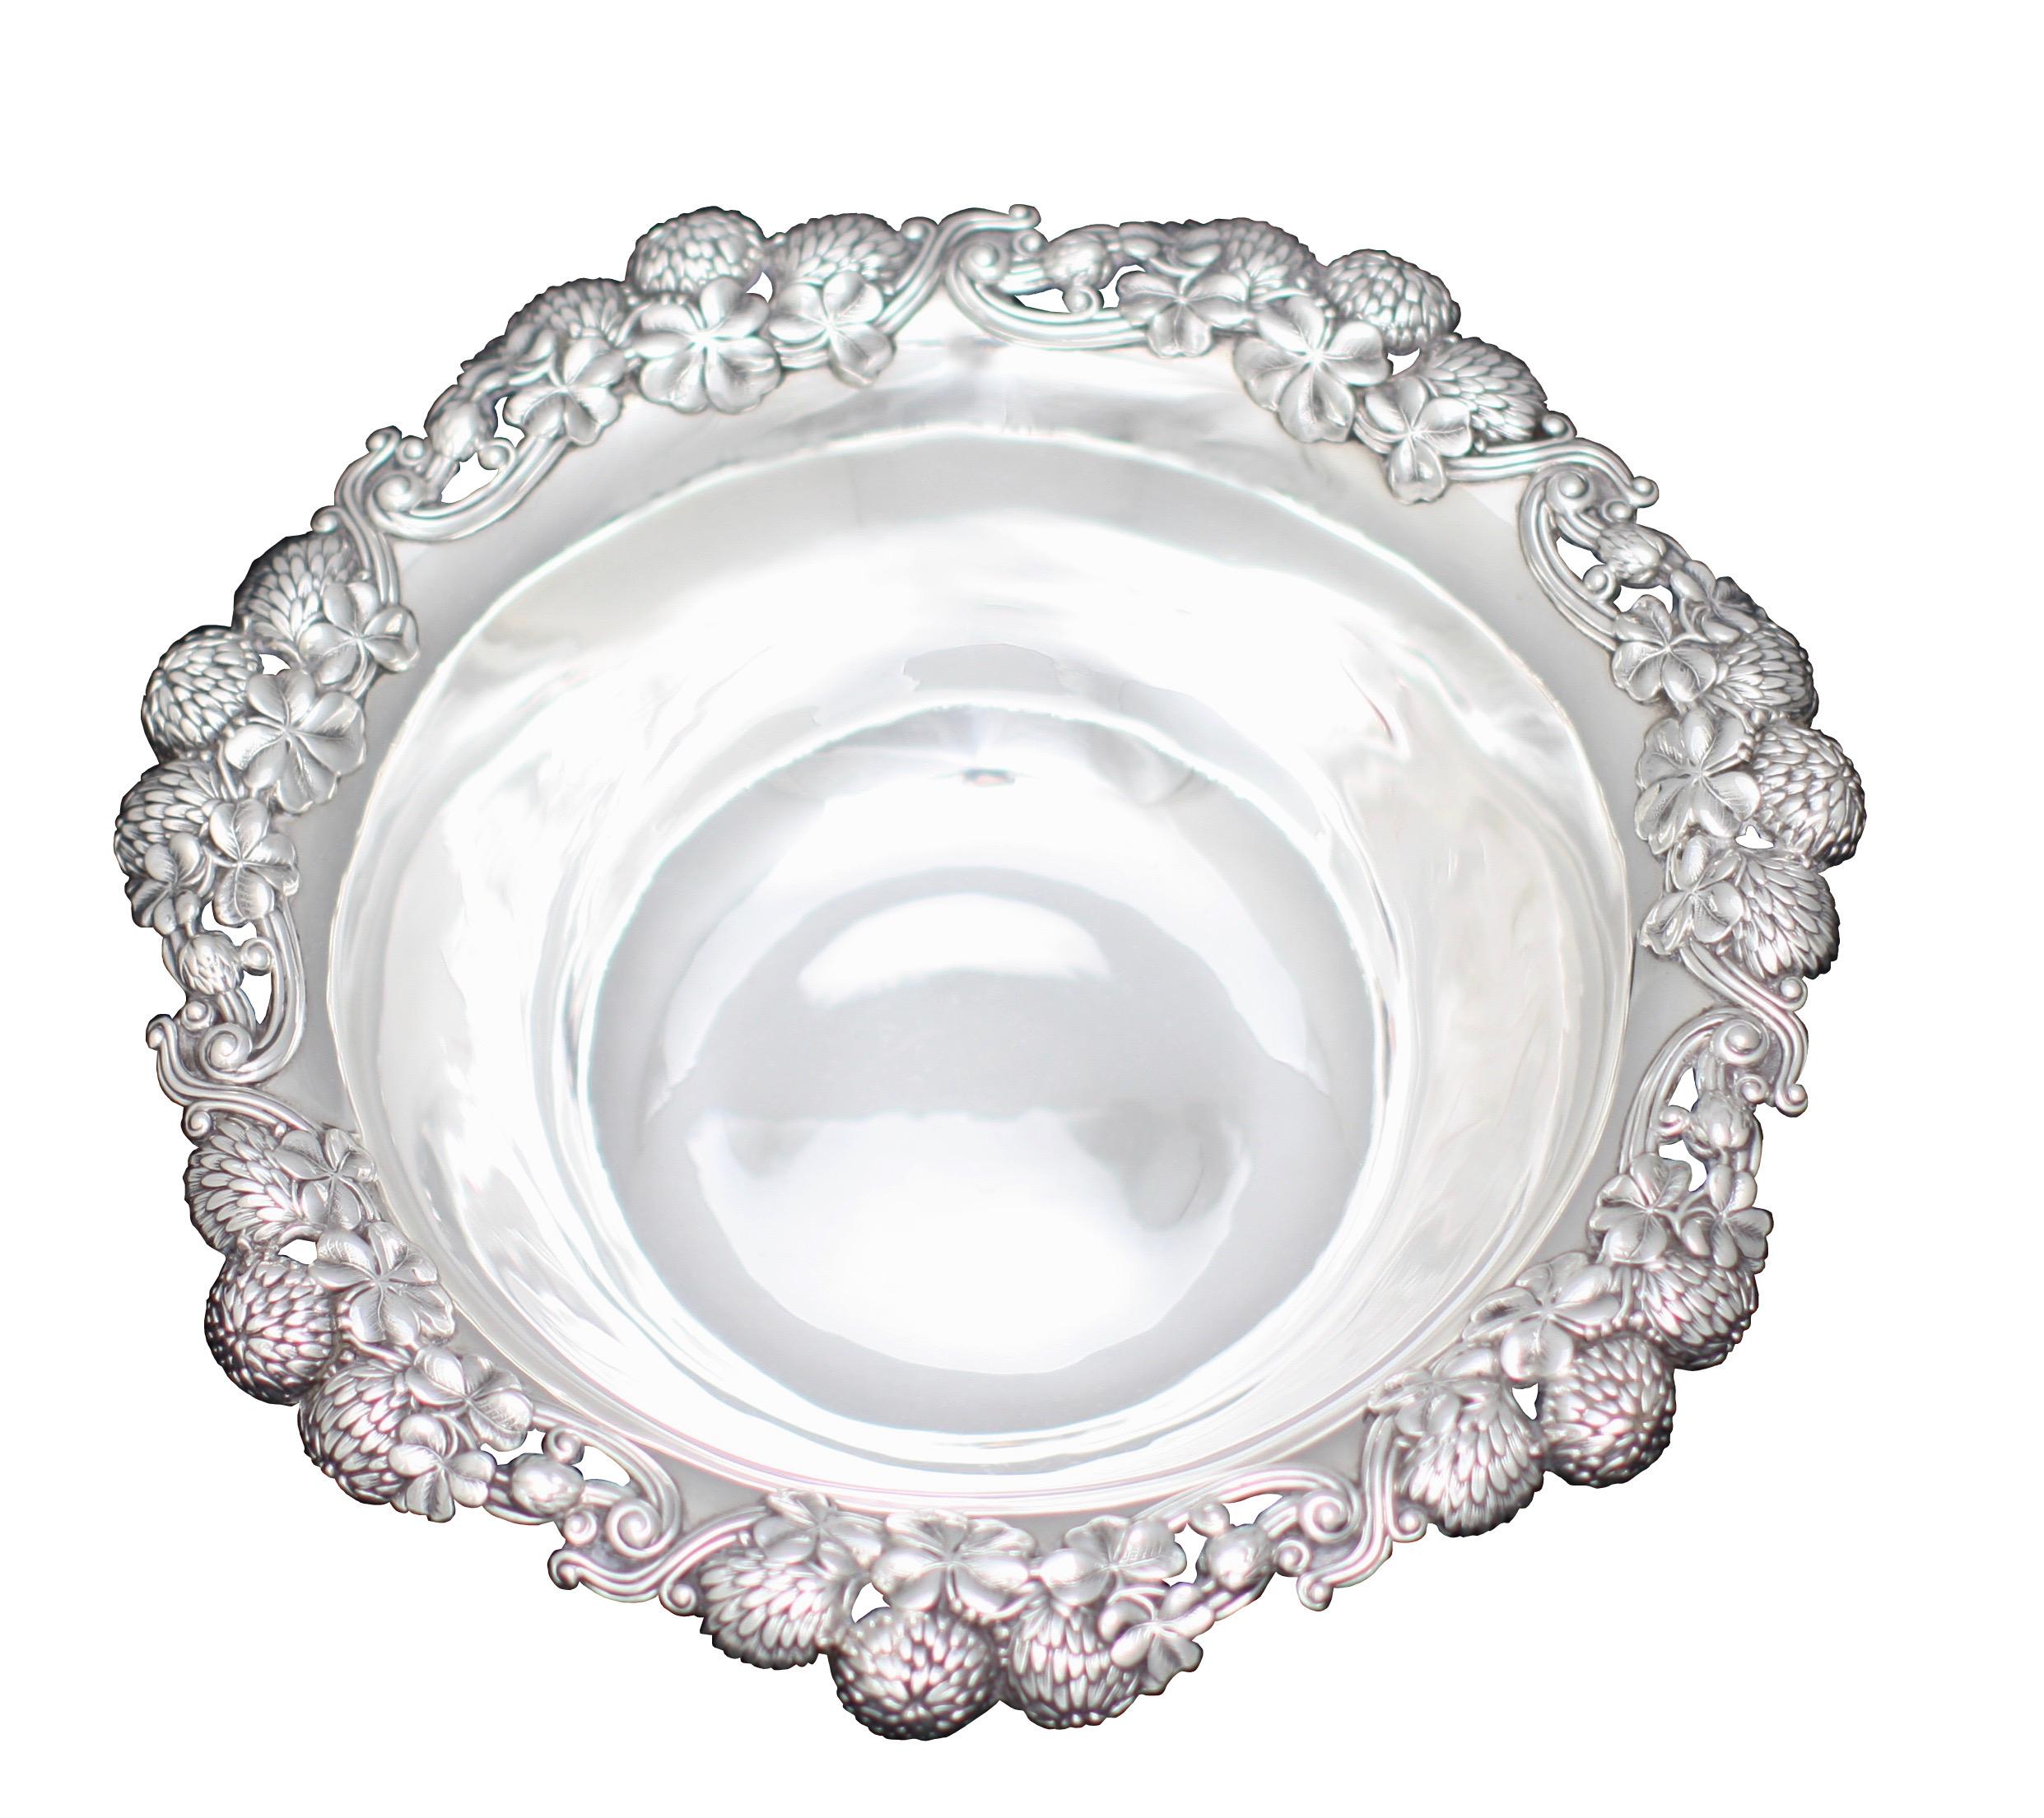 Mid-20th Century American Sterling Silver Bowl, Tiffany & Co., New York, circa 1950 For Sale